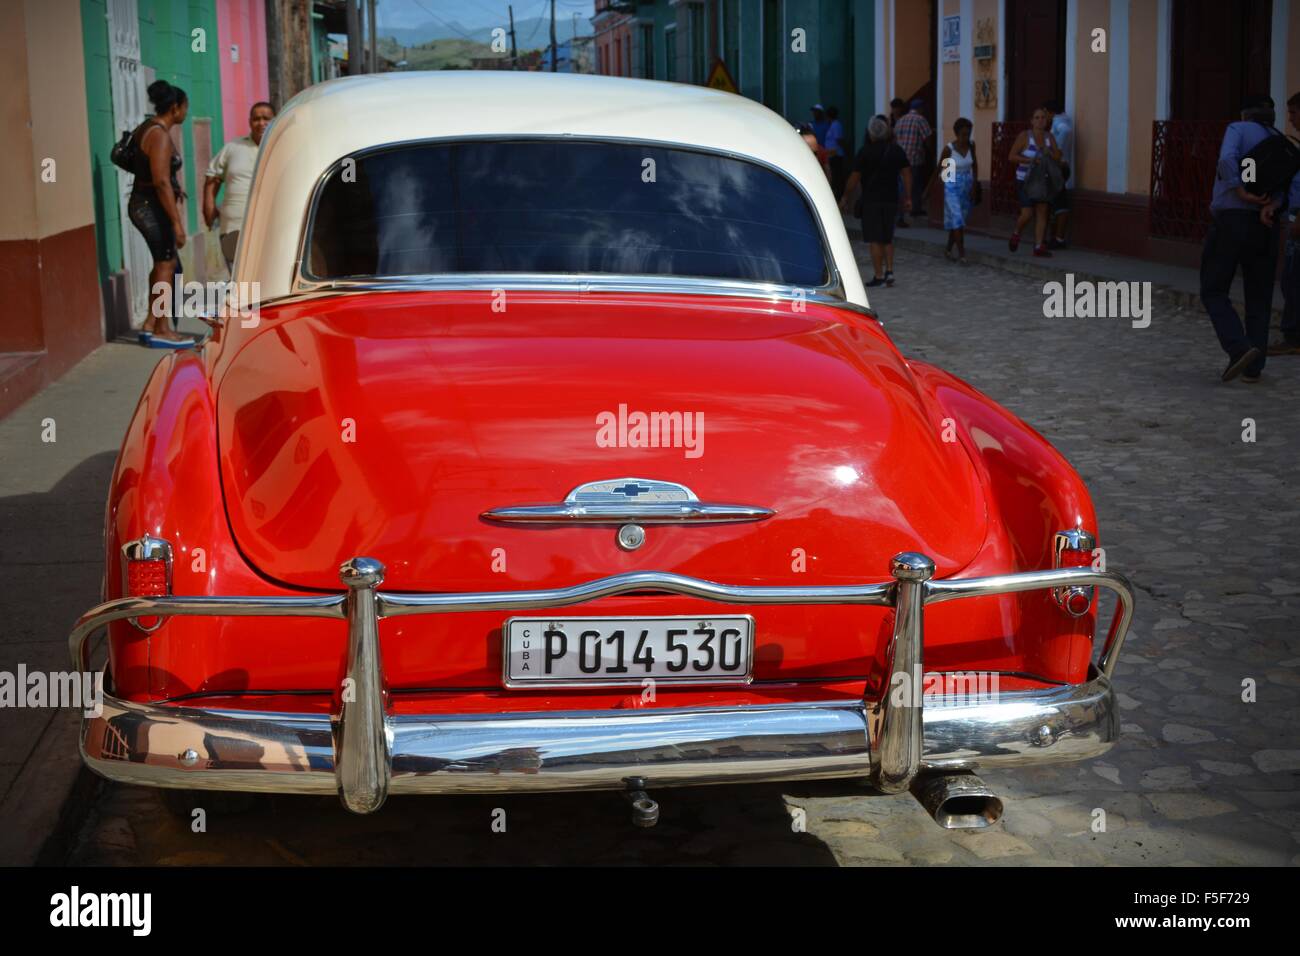 Vintage red and white car parked on a quiet street in Trinidad Cuba Stock Photo